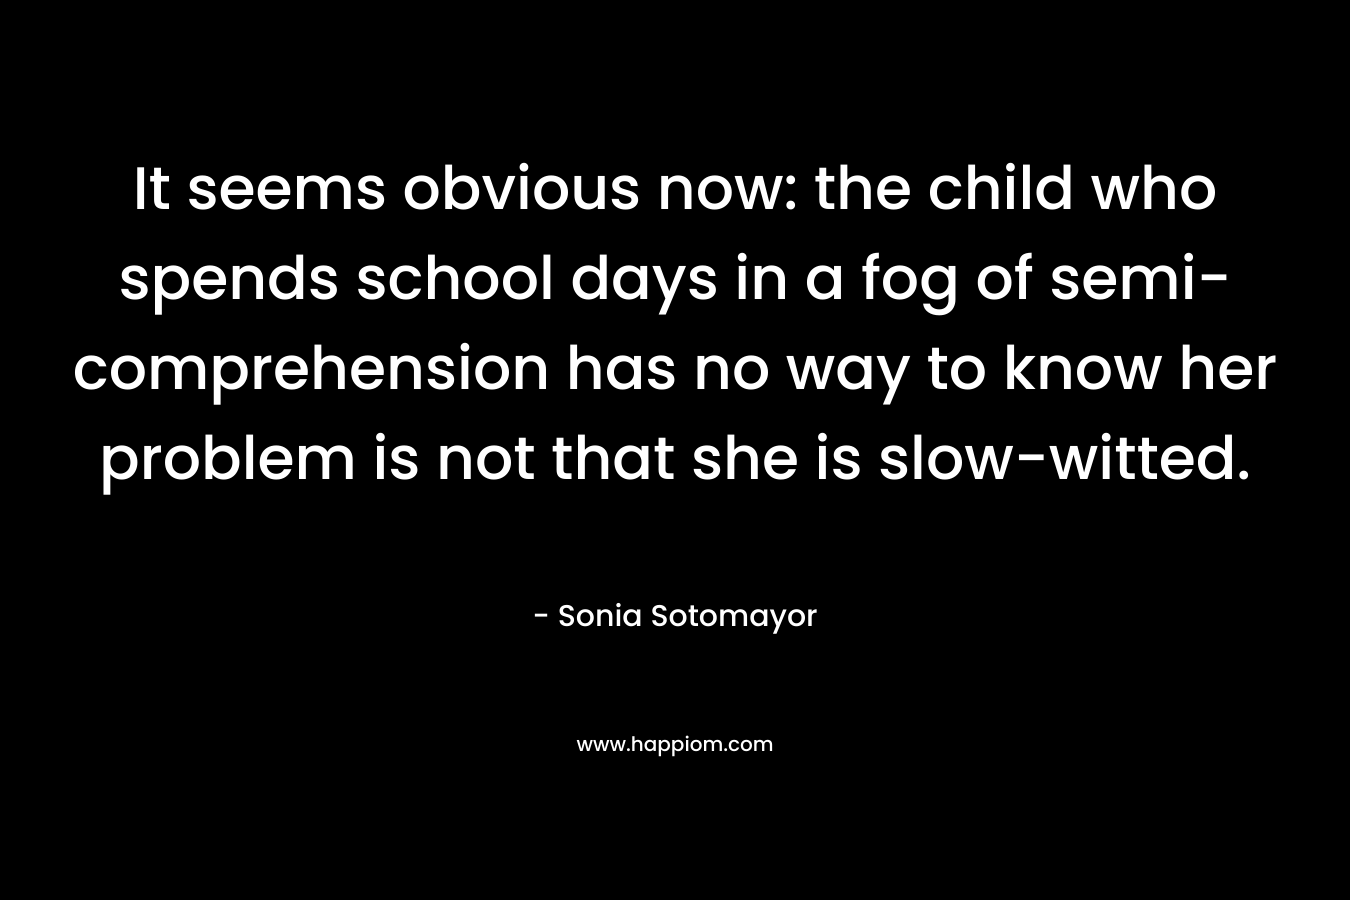 It seems obvious now: the child who spends school days in a fog of semi-comprehension has no way to know her problem is not that she is slow-witted. – Sonia Sotomayor